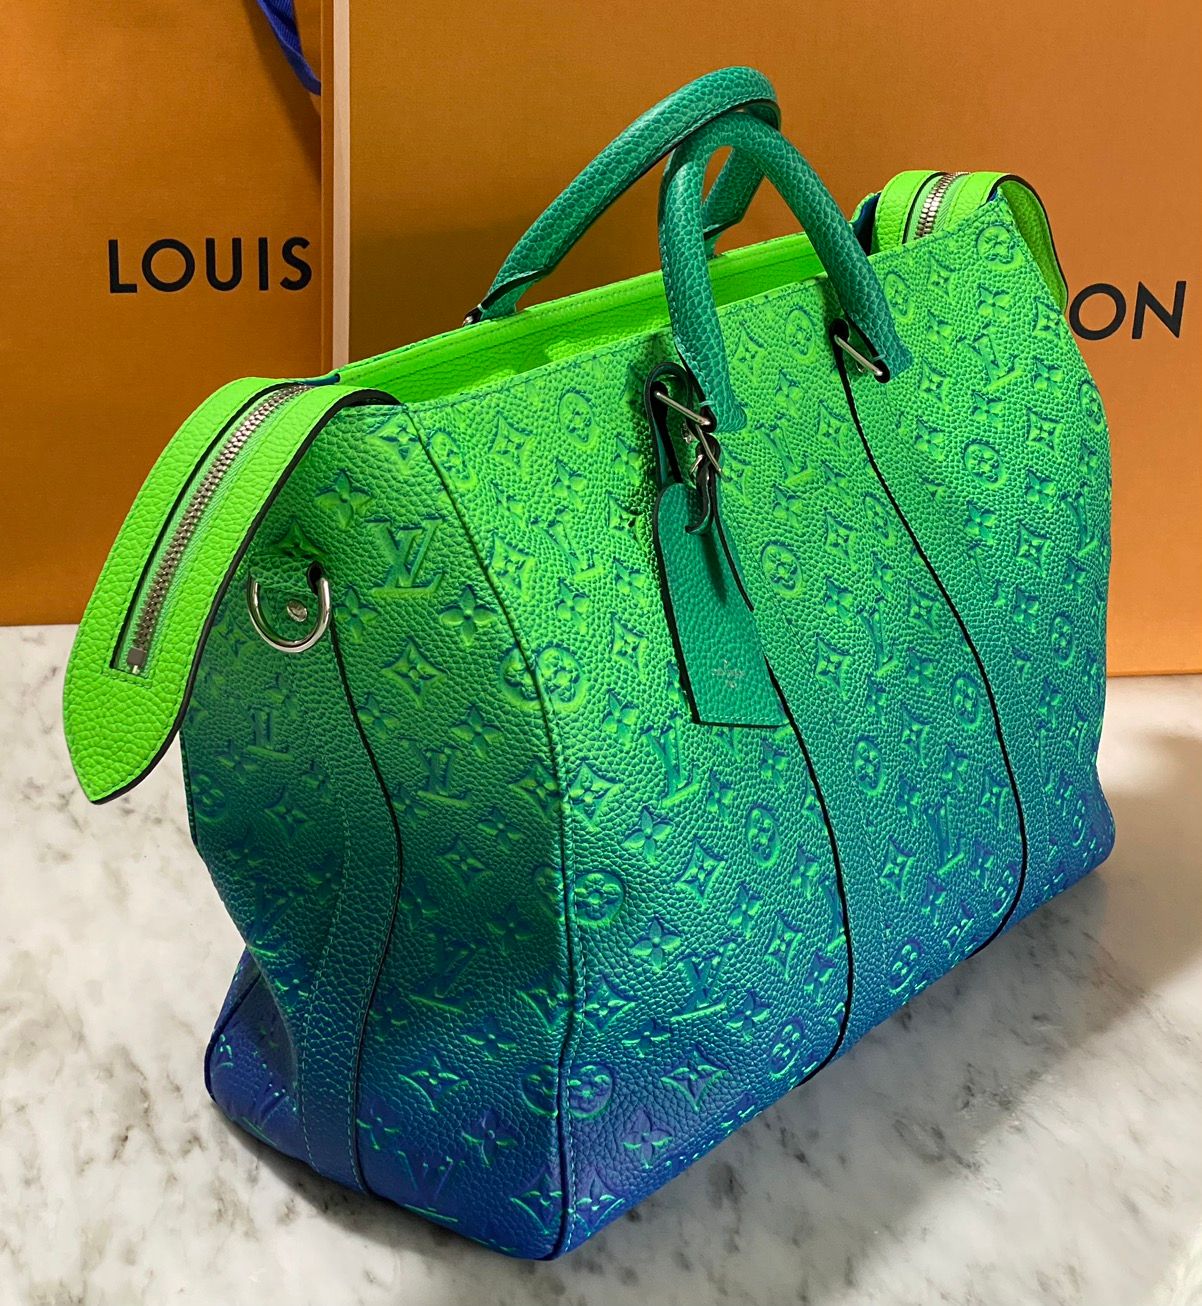 Taurillon Illusion - 5 For Sale on 1stDibs  louis vuitton taurillon  illusion, louis vuitton illusion, taurillon meaning